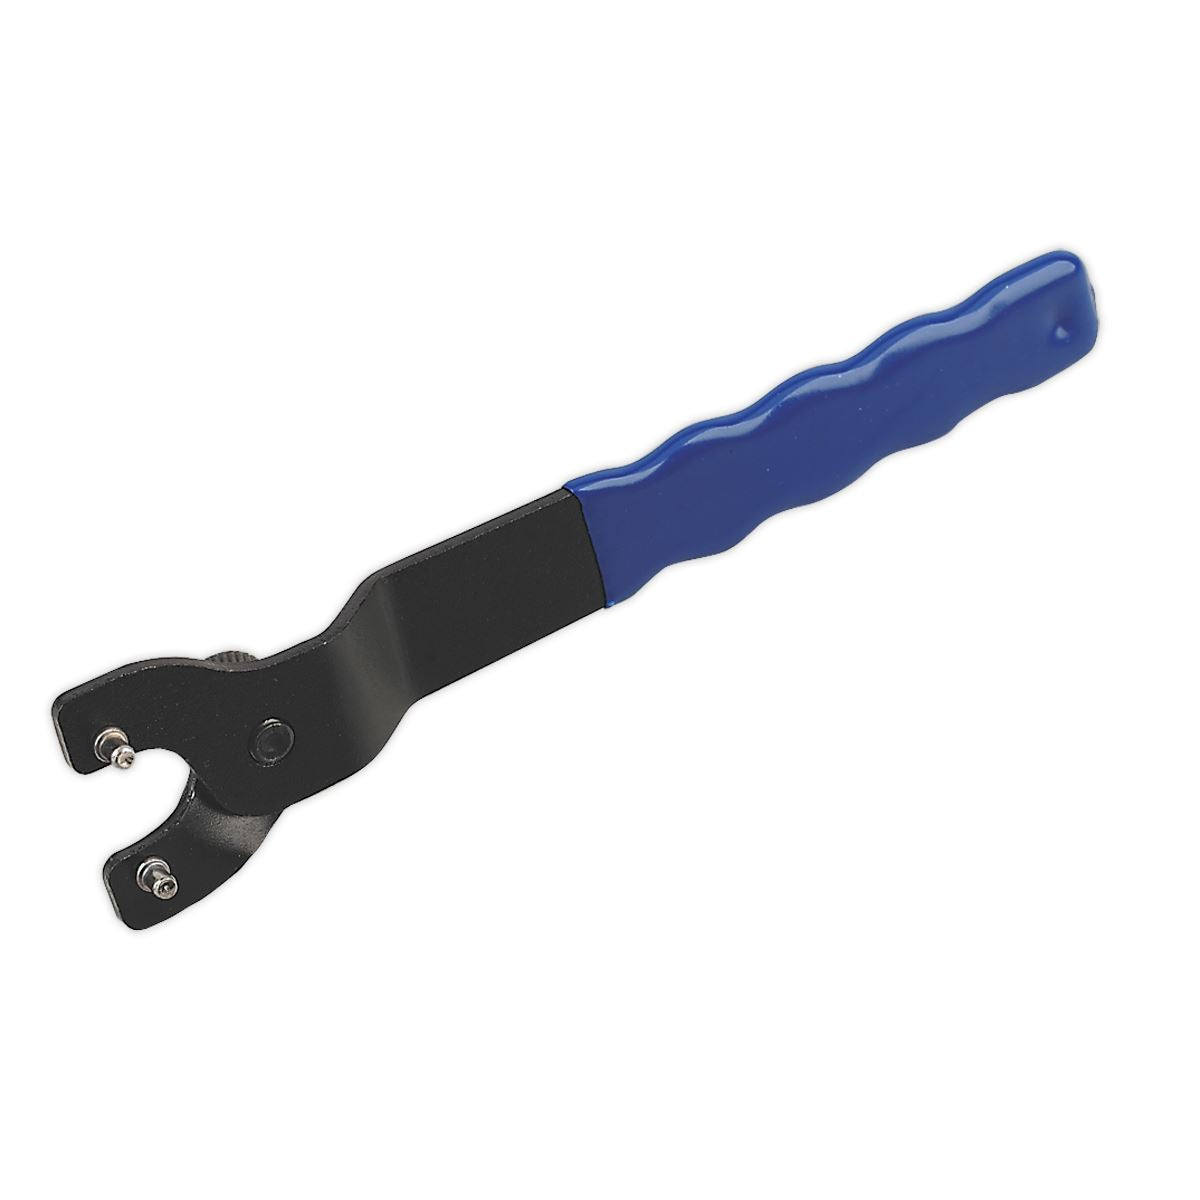 Sealey Universal Pin Spanner 10-30mm